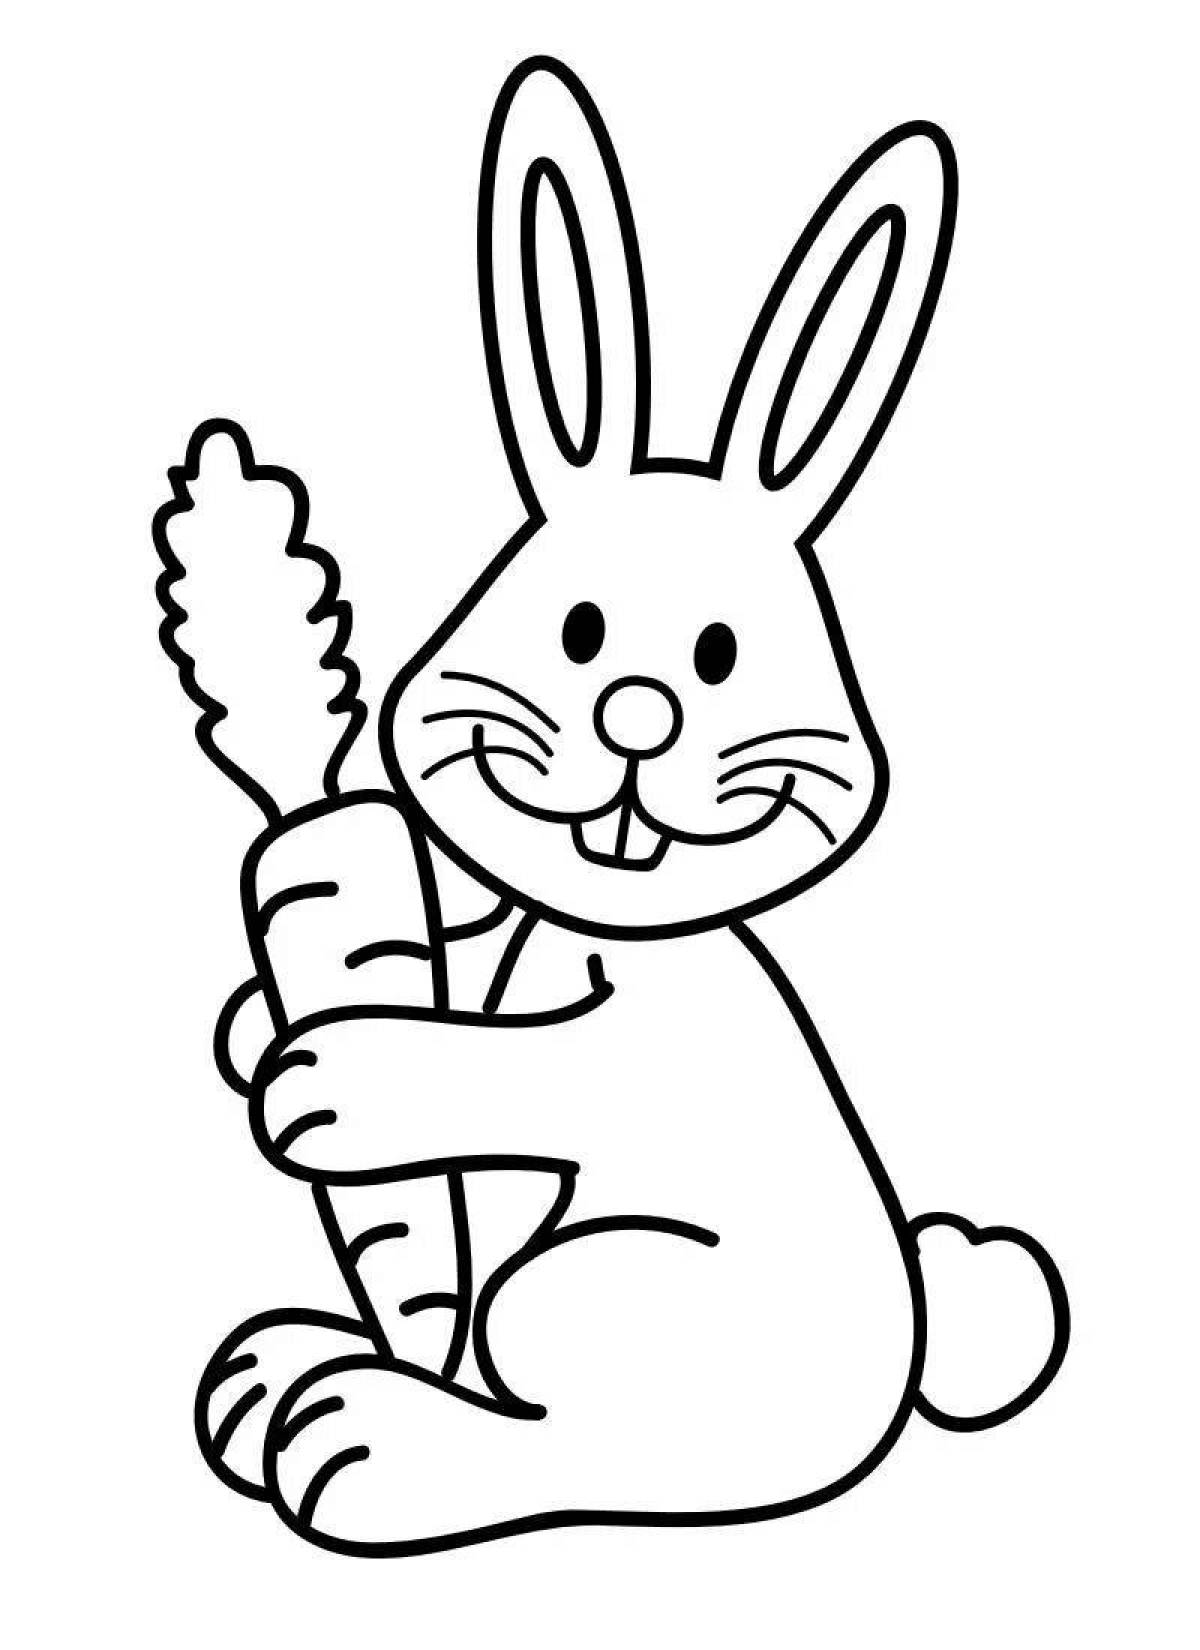 Piggy bank bubbly coloring page